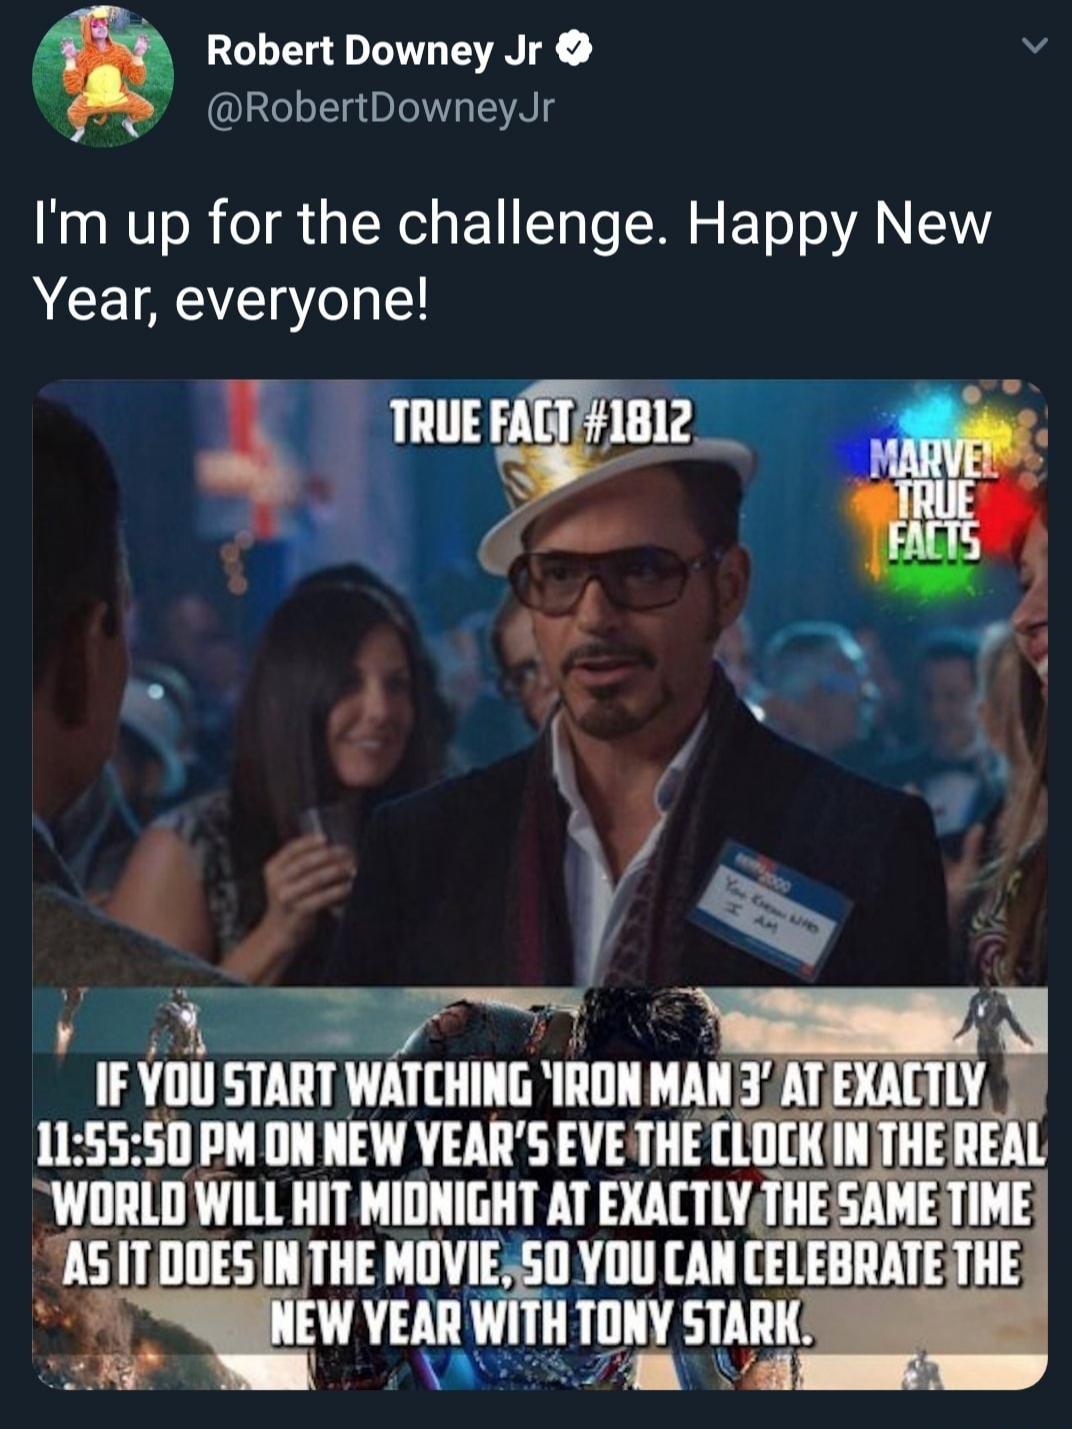 movies to watch new years - tony stark happy new year - Robert Downey Jr Jr I'm up for the challenge. Happy New Year, everyone! True Fact Marvel True Facts If You Start Watching 'Iron Man'At Exactly 50 Pm On New Year'S Eve The Clock In The Real World Will